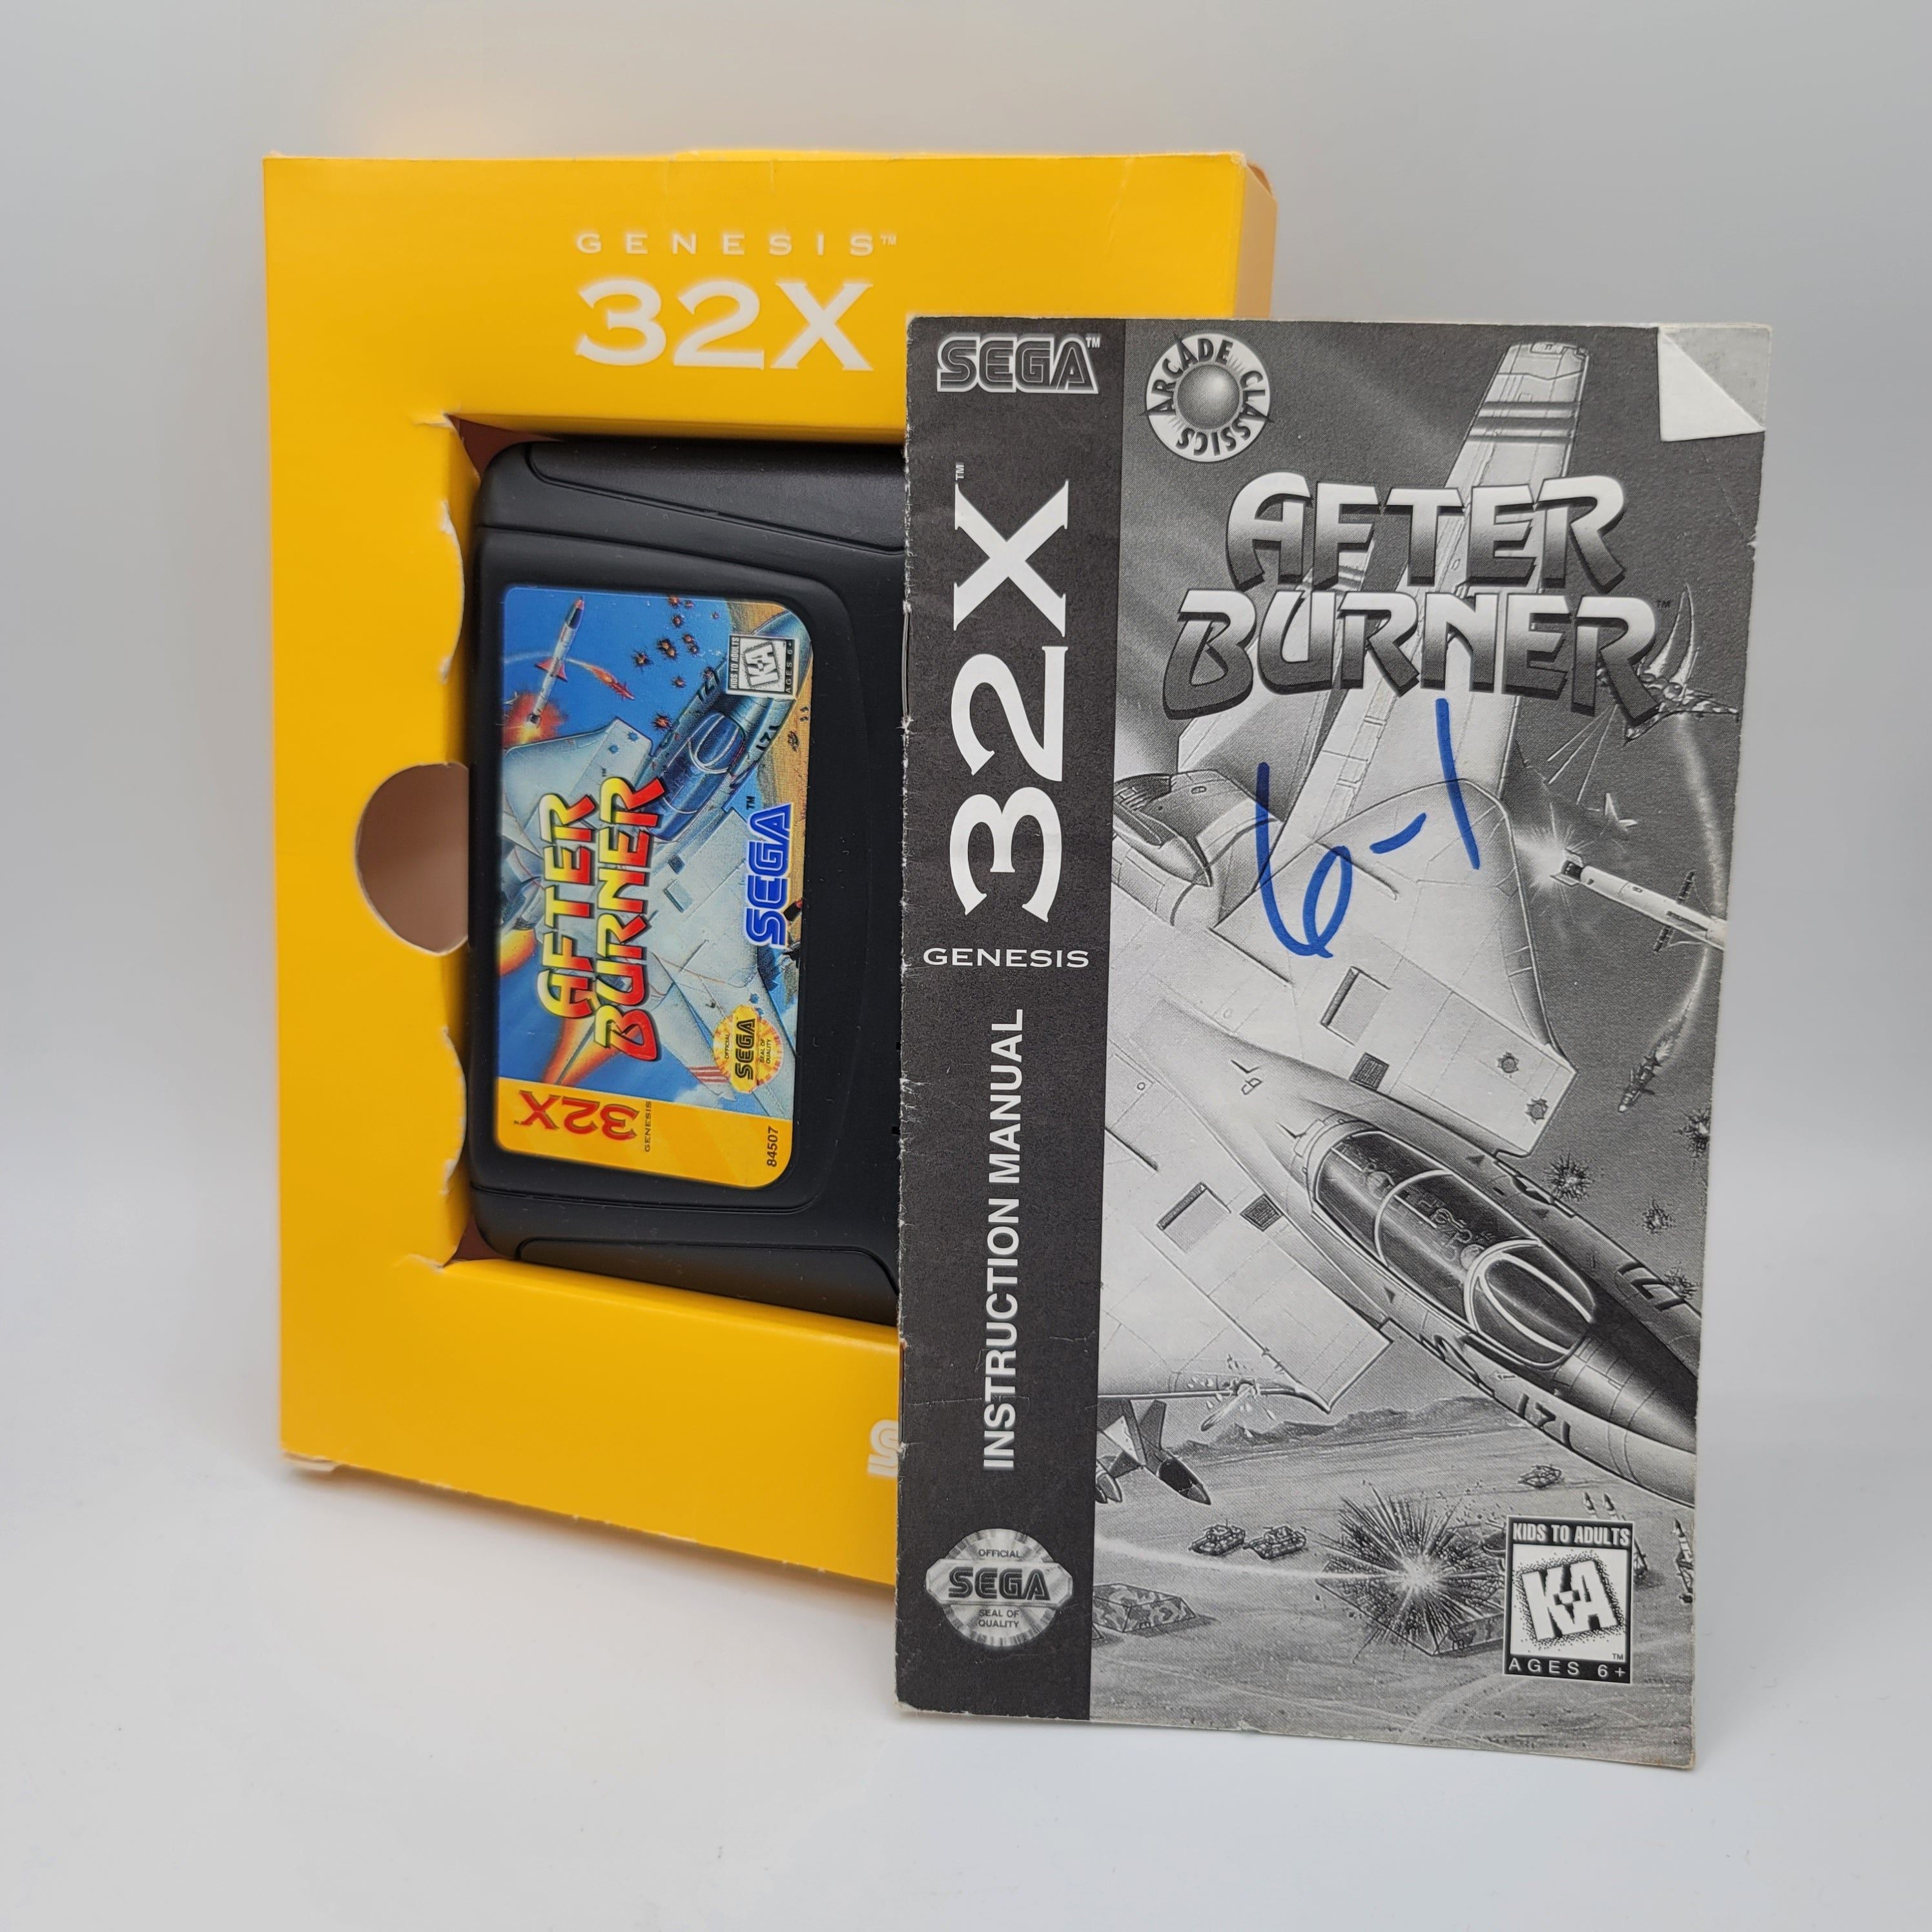 32X - After Burner (Complete in Box / With Manual)